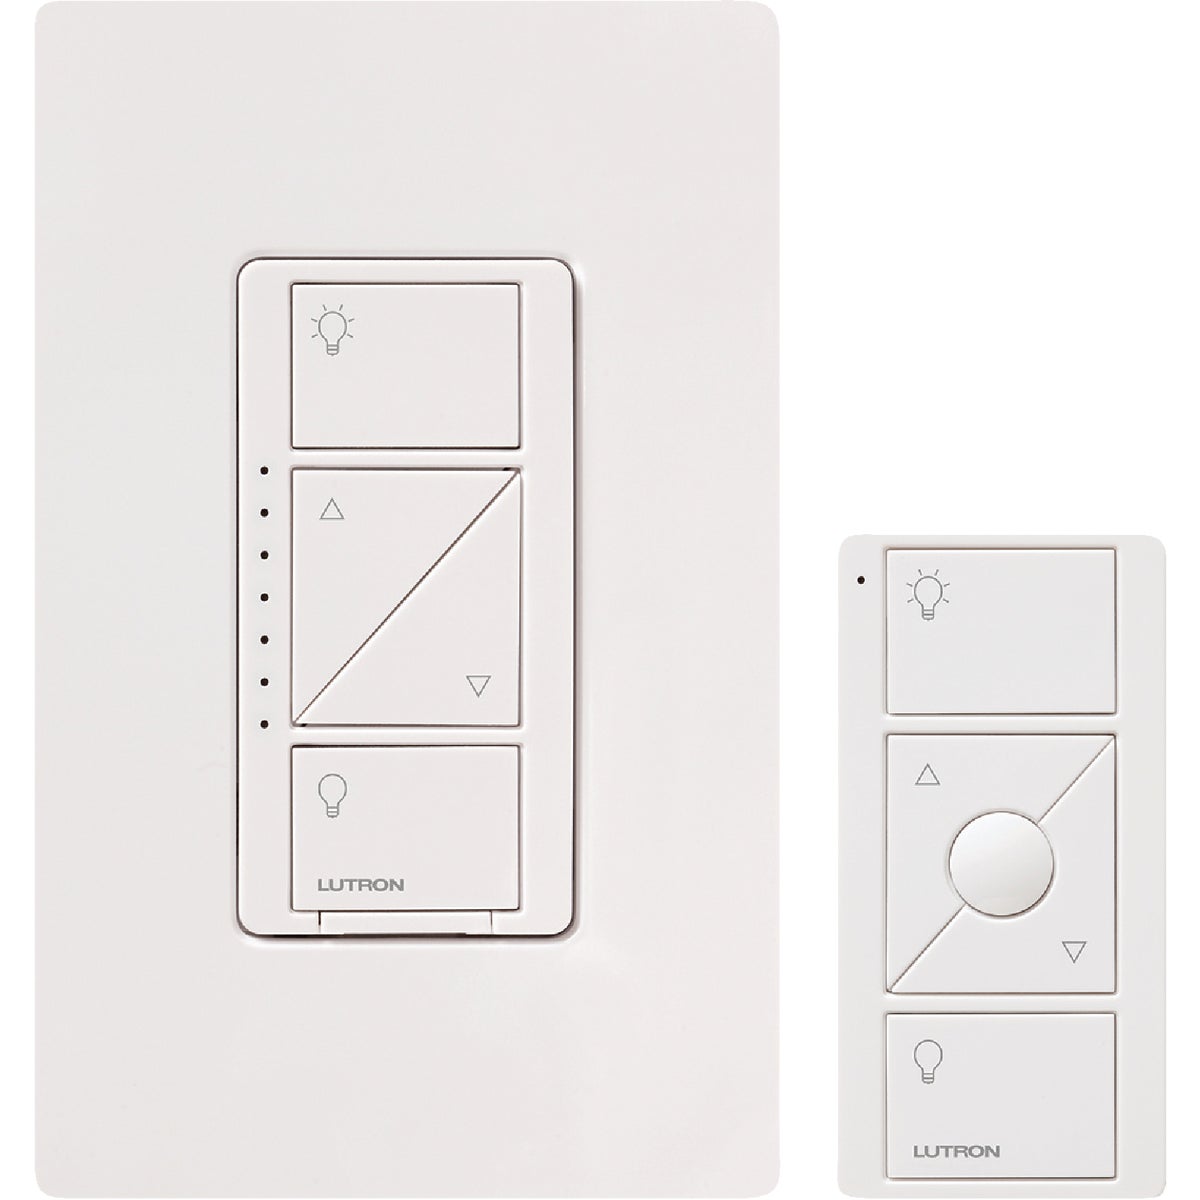 Item 501321, Wireless dimmer and Pico remote control.